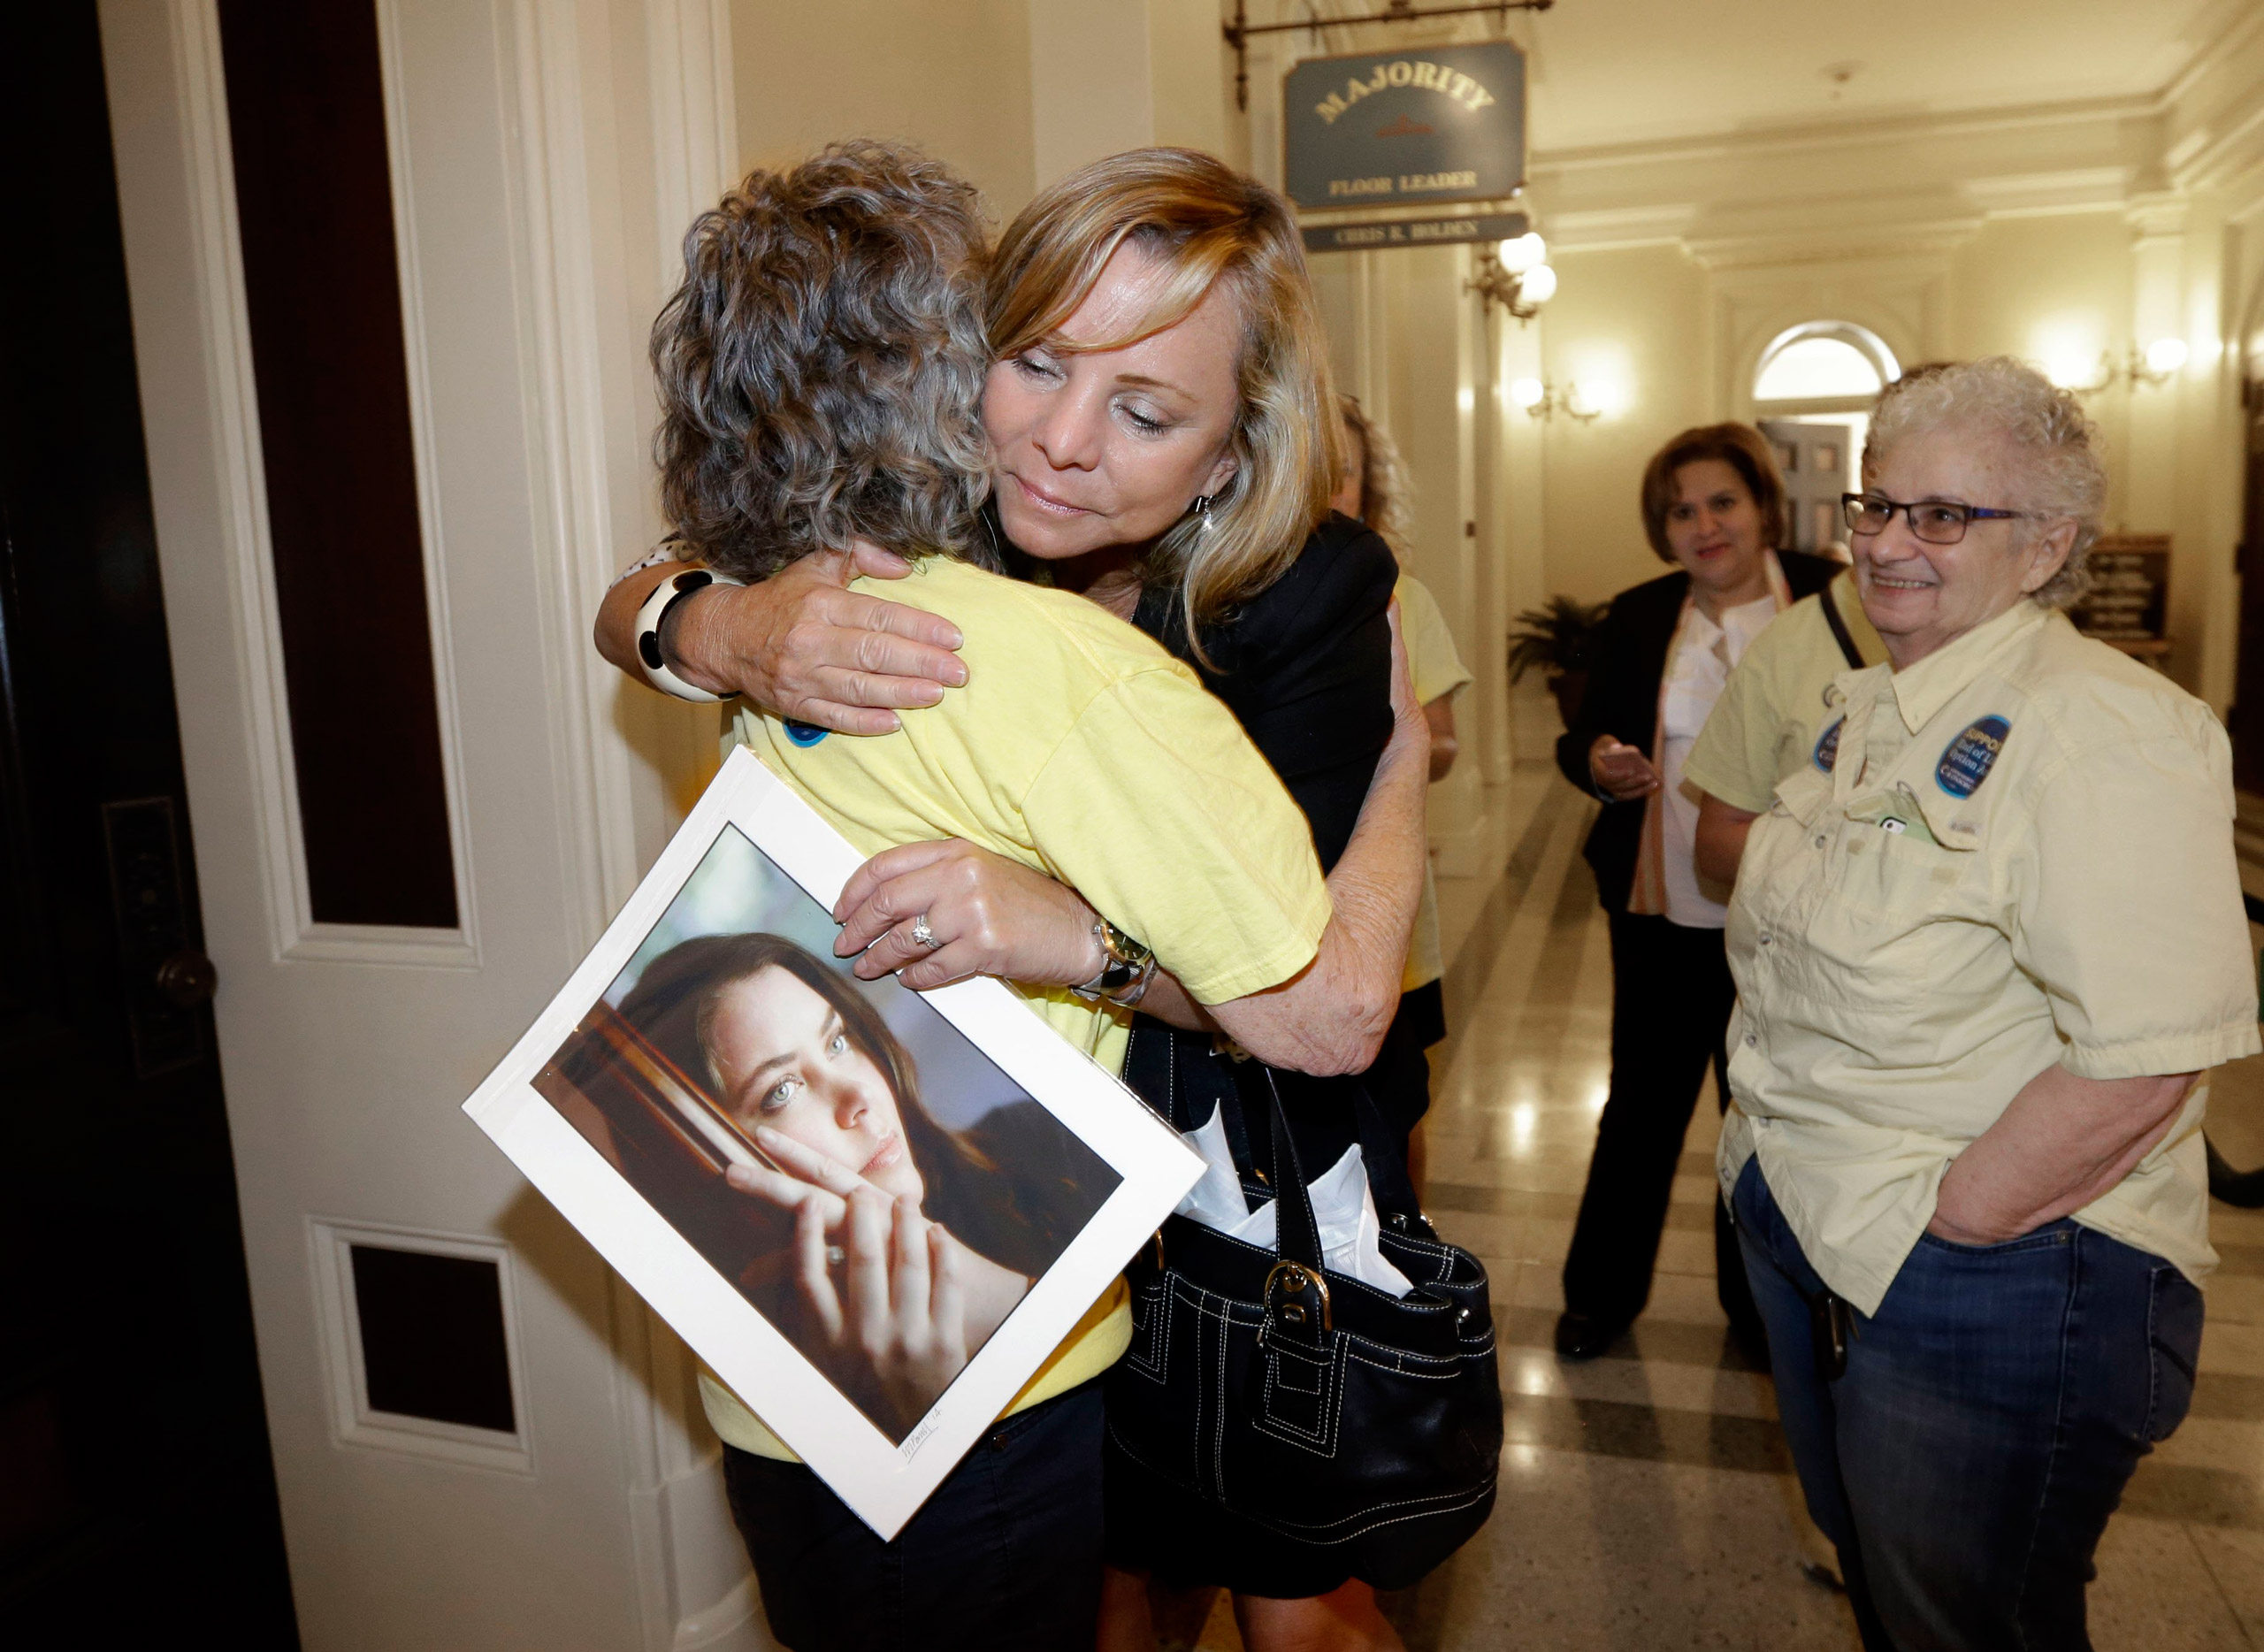 Debbie Ziegler holds a photo of her daughter, Brittany Maynard, as she receives congratulations from Ellen Pontac, after a right-to die measure was approved by the state Assembly, Wednesday, Sept. 9, 2015, in Sacramento, Calif. The bill, approved on a 42-33 vote, that would allow terminally ill patients to legally end their lives, now goes to the Senate.  Brittany Maynard was the California woman with brain cancer who moved to Oregon to legally end her life last fall. (AP Photo/Rich Pedroncelli)